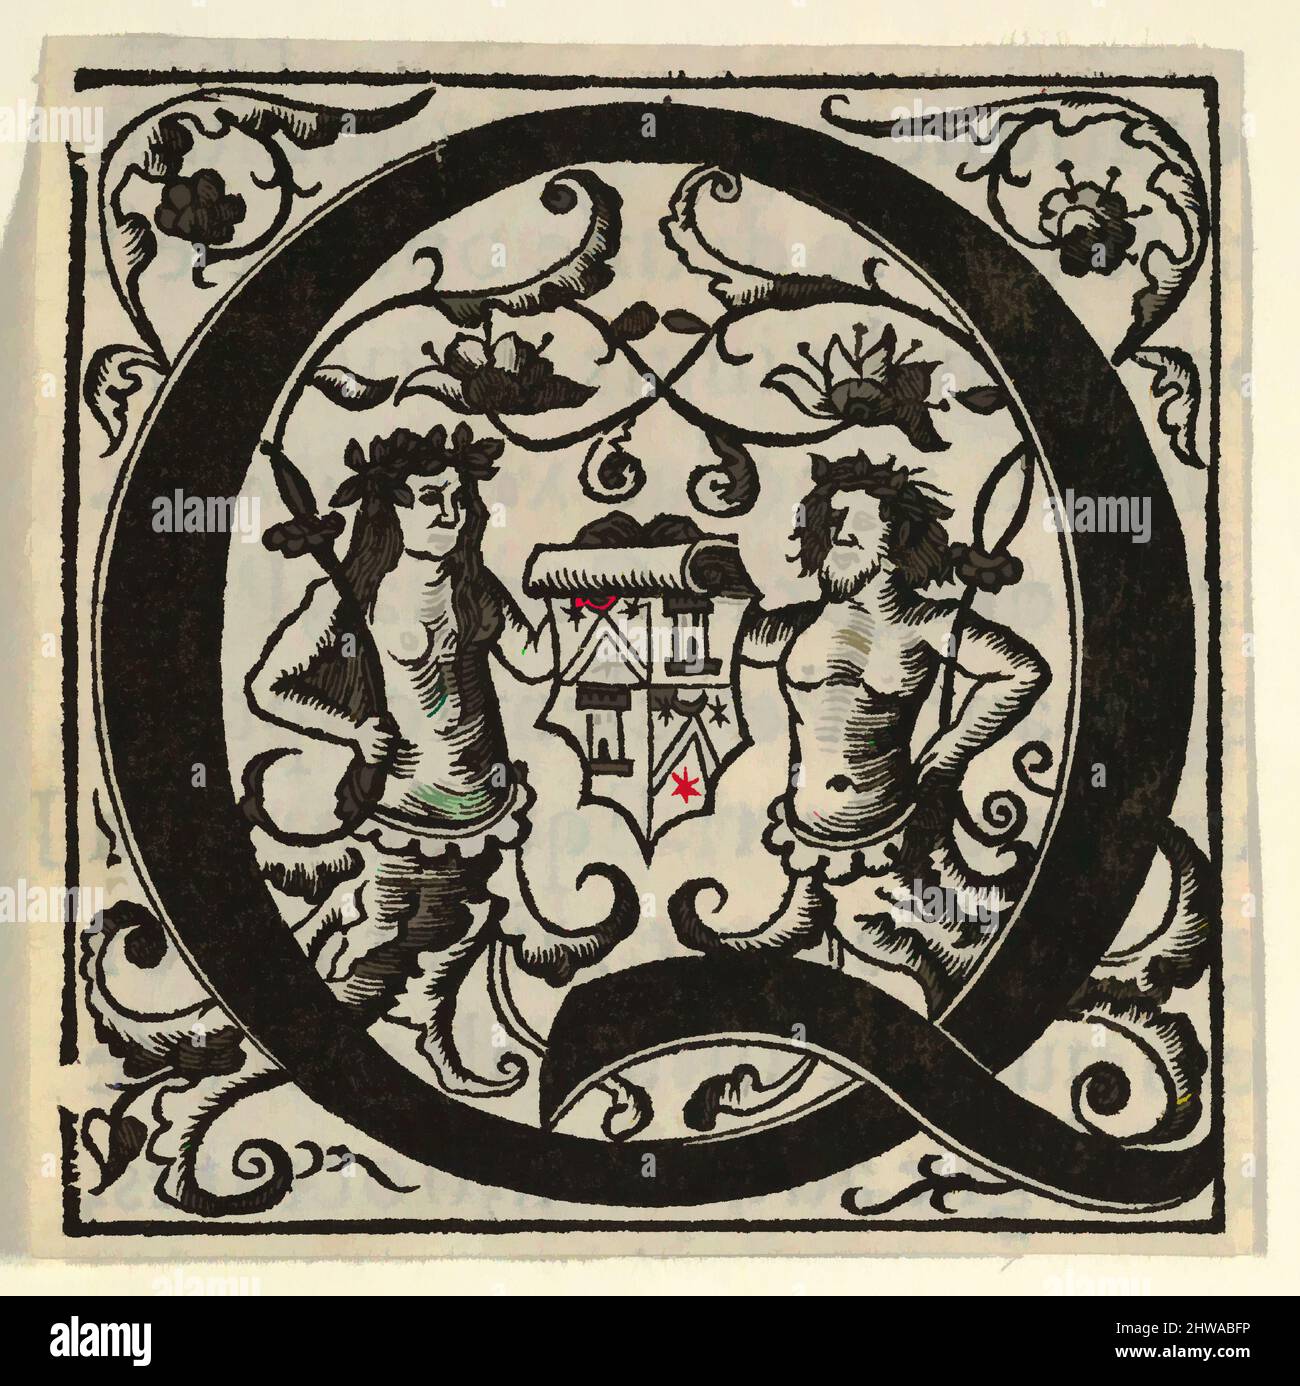 Art inspired by Drawings and Prints, Print, Initial letter Q with coat of arms, mid-16th century, 1532, 1554, Woodcut, Sheet: 2 3/8 × 2 3/8 in, Classic works modernized by Artotop with a splash of modernity. Shapes, color and value, eye-catching visual impact on art. Emotions through freedom of artworks in a contemporary way. A timeless message pursuing a wildly creative new direction. Artists turning to the digital medium and creating the Artotop NFT Stock Photo